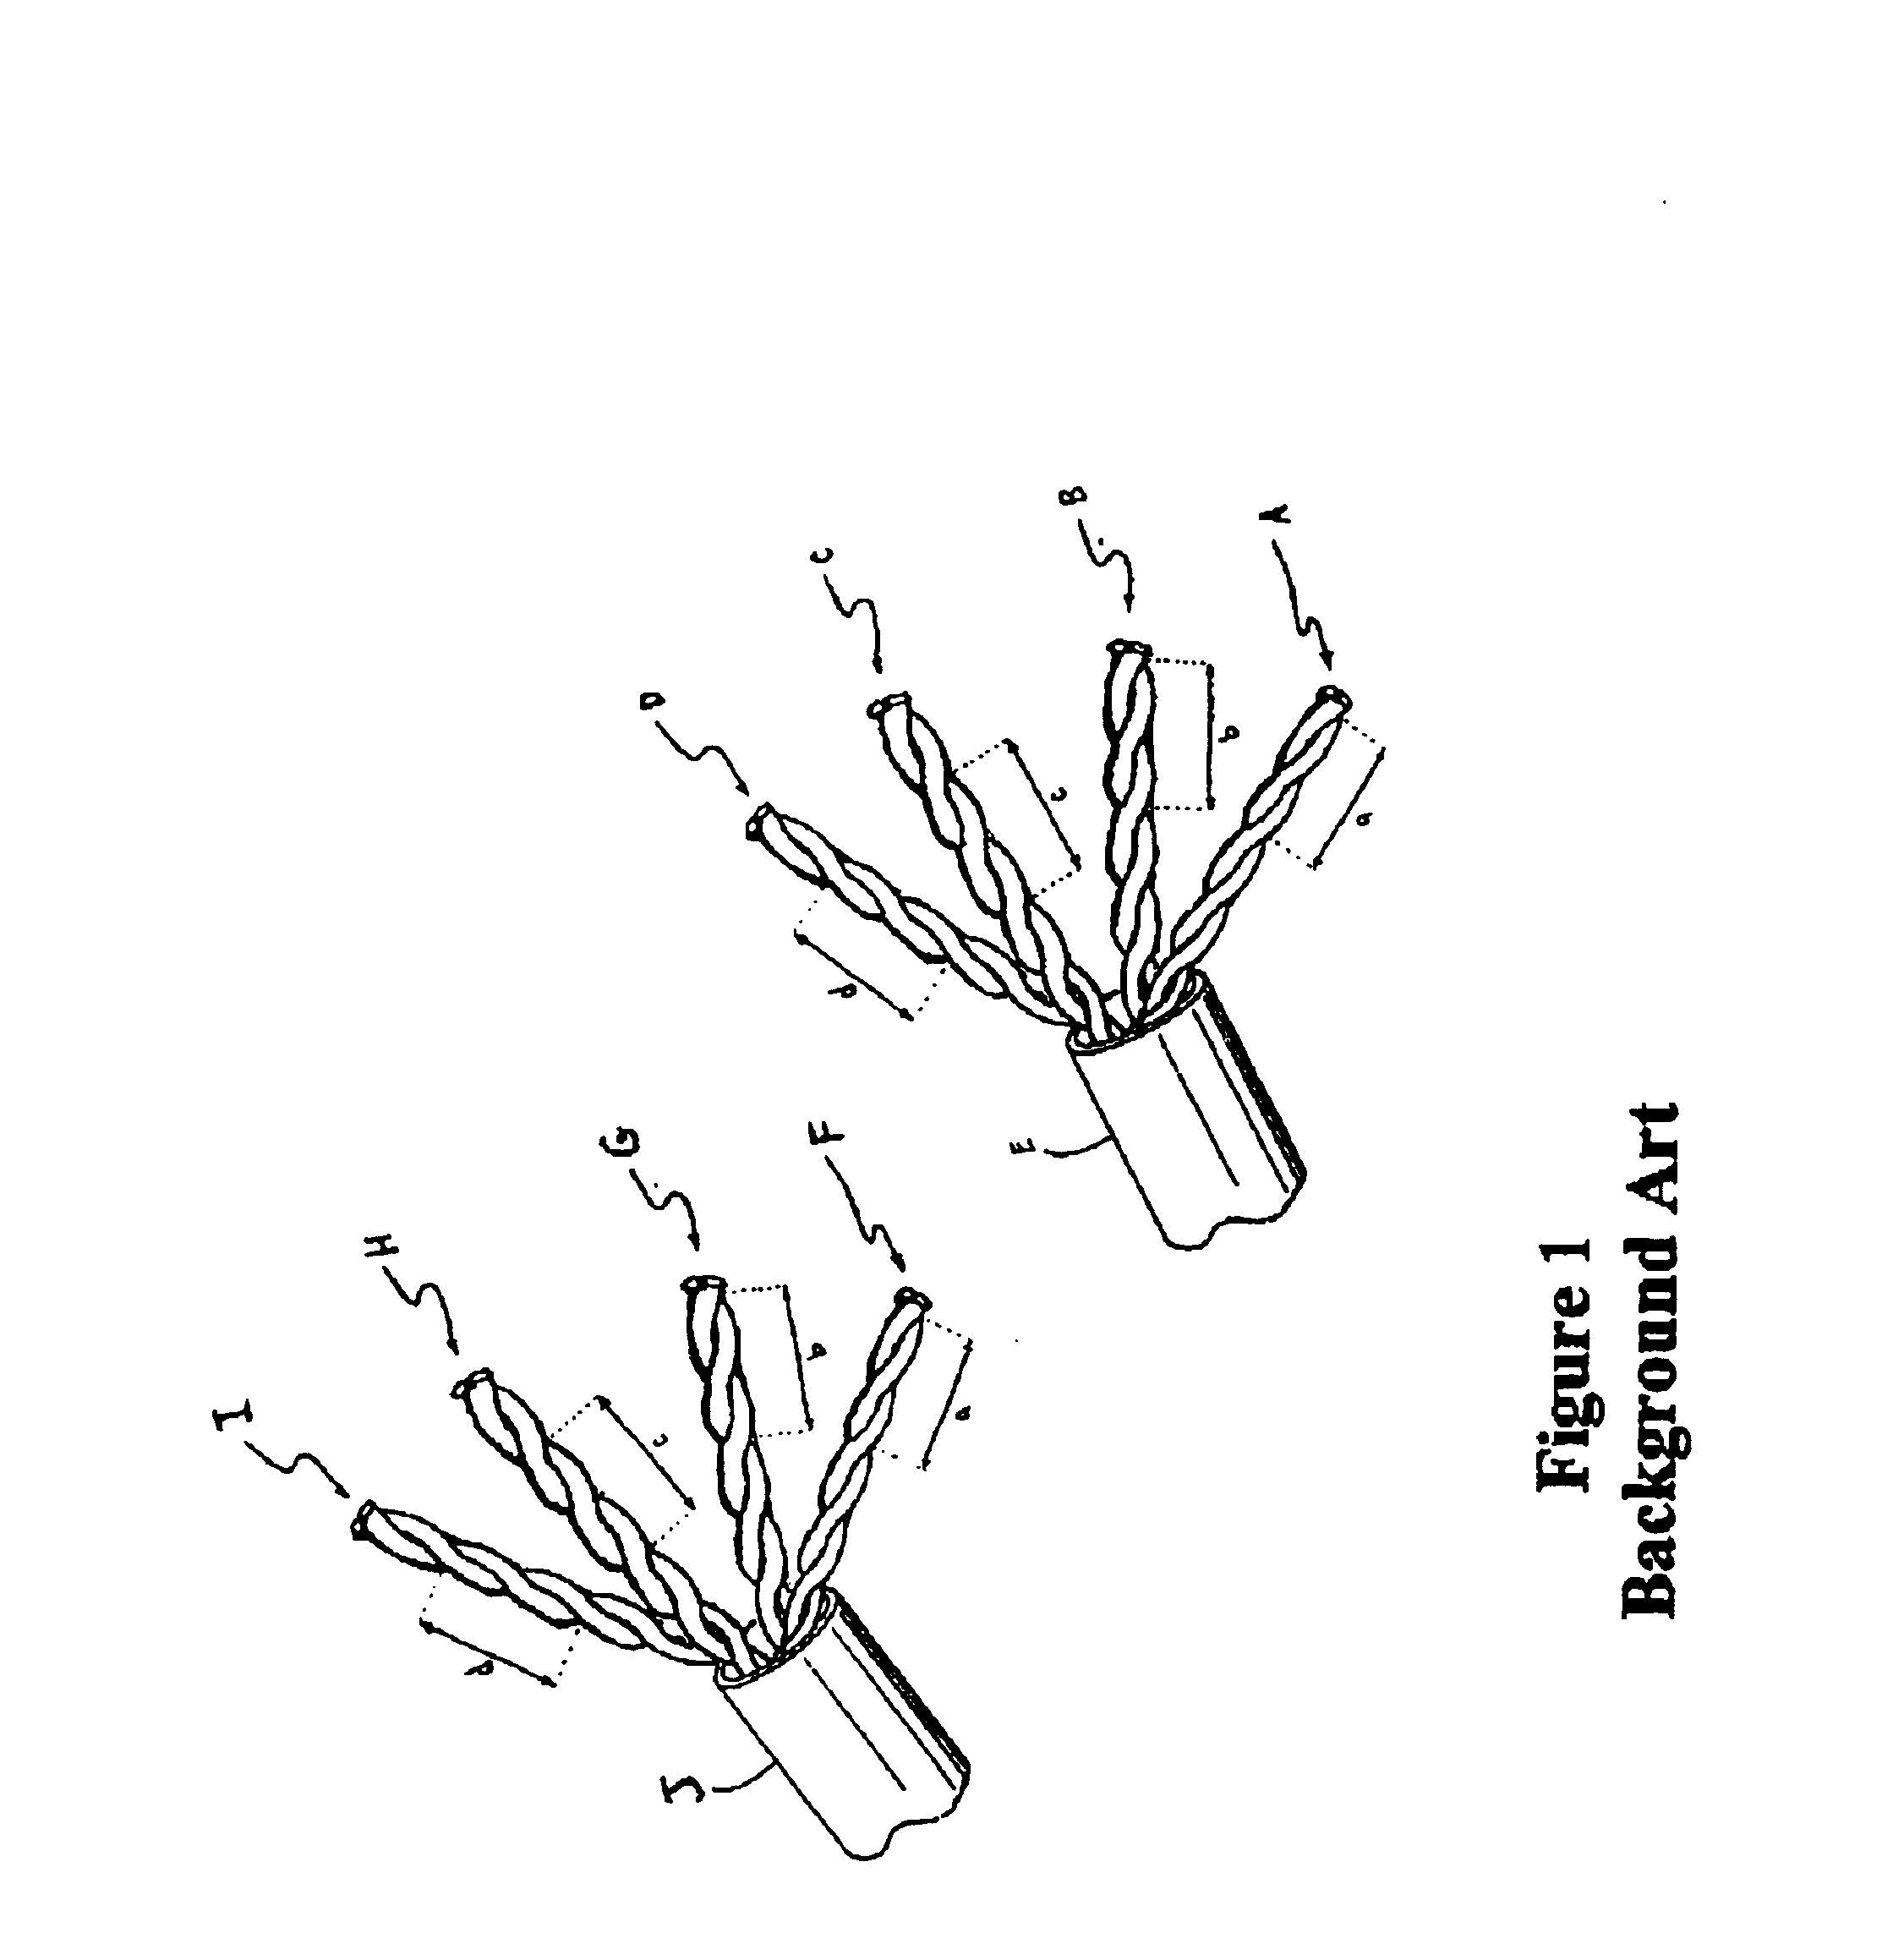 Local area network cabling arrangement with randomized variation